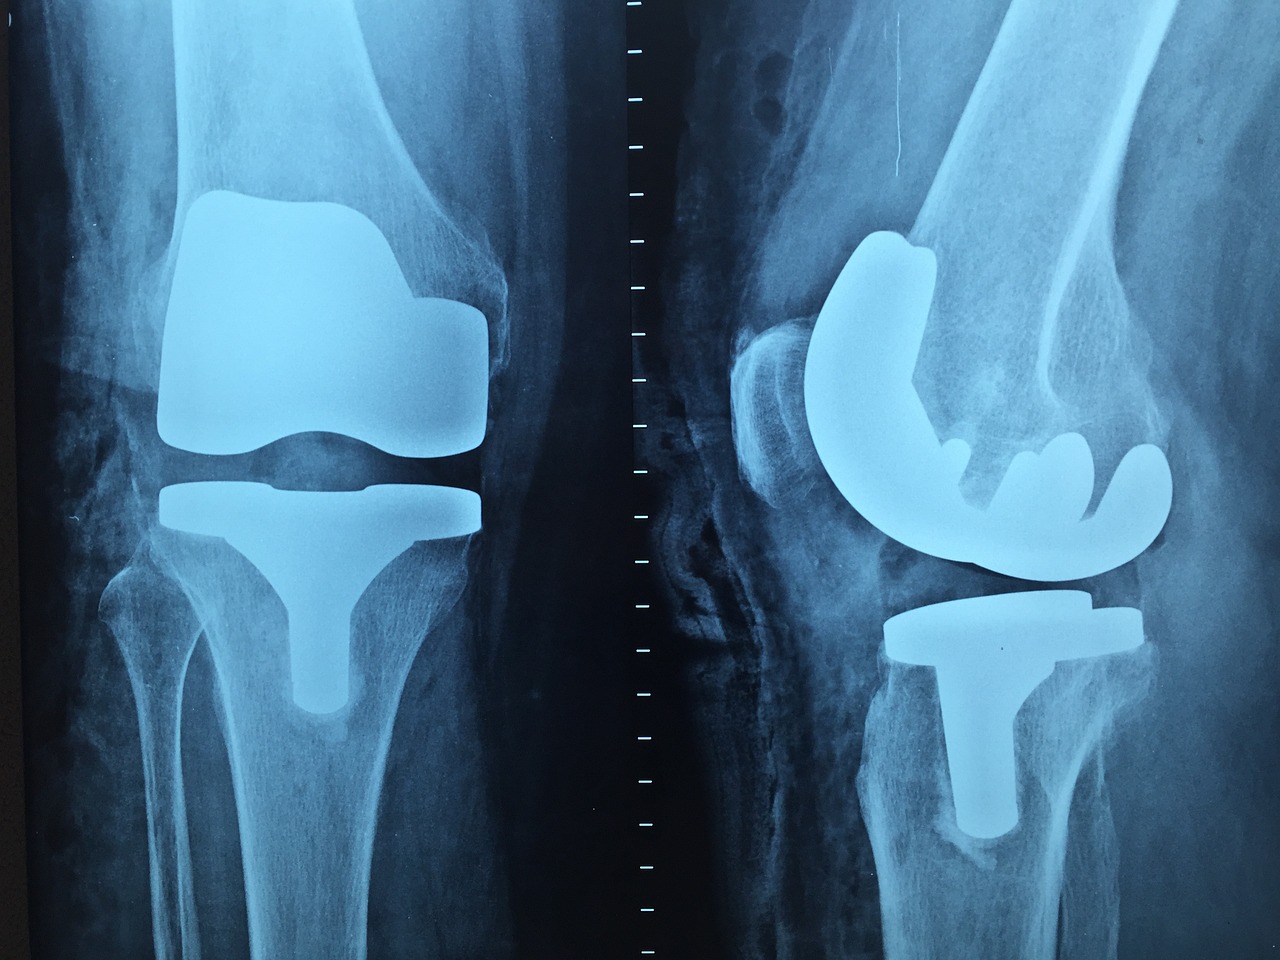 x-ray of an implant, including the femoral and tibial components of a total knee replacement